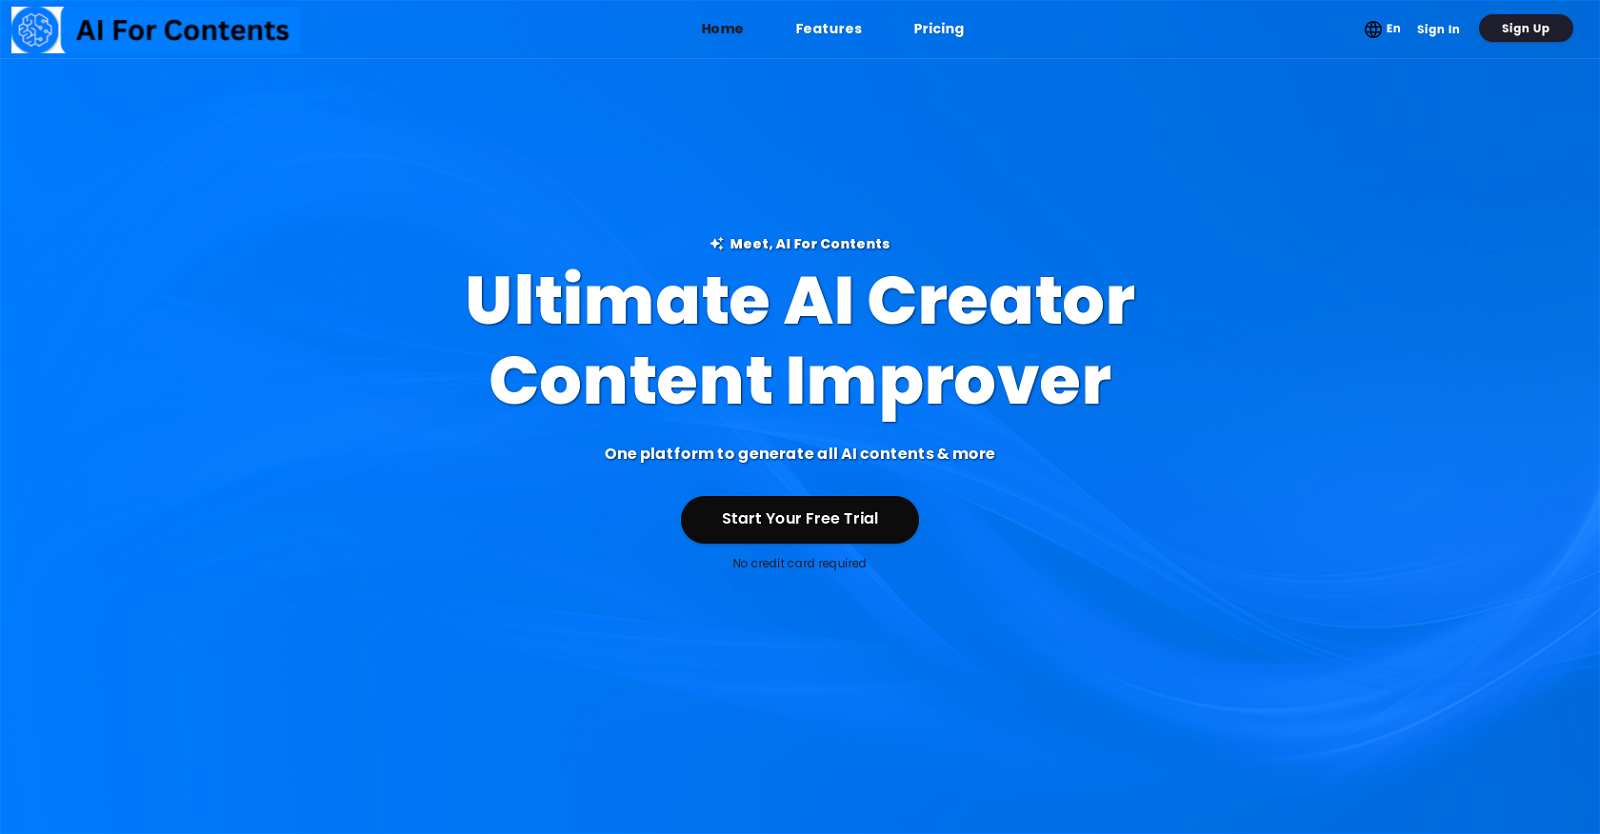 AI For Contents website